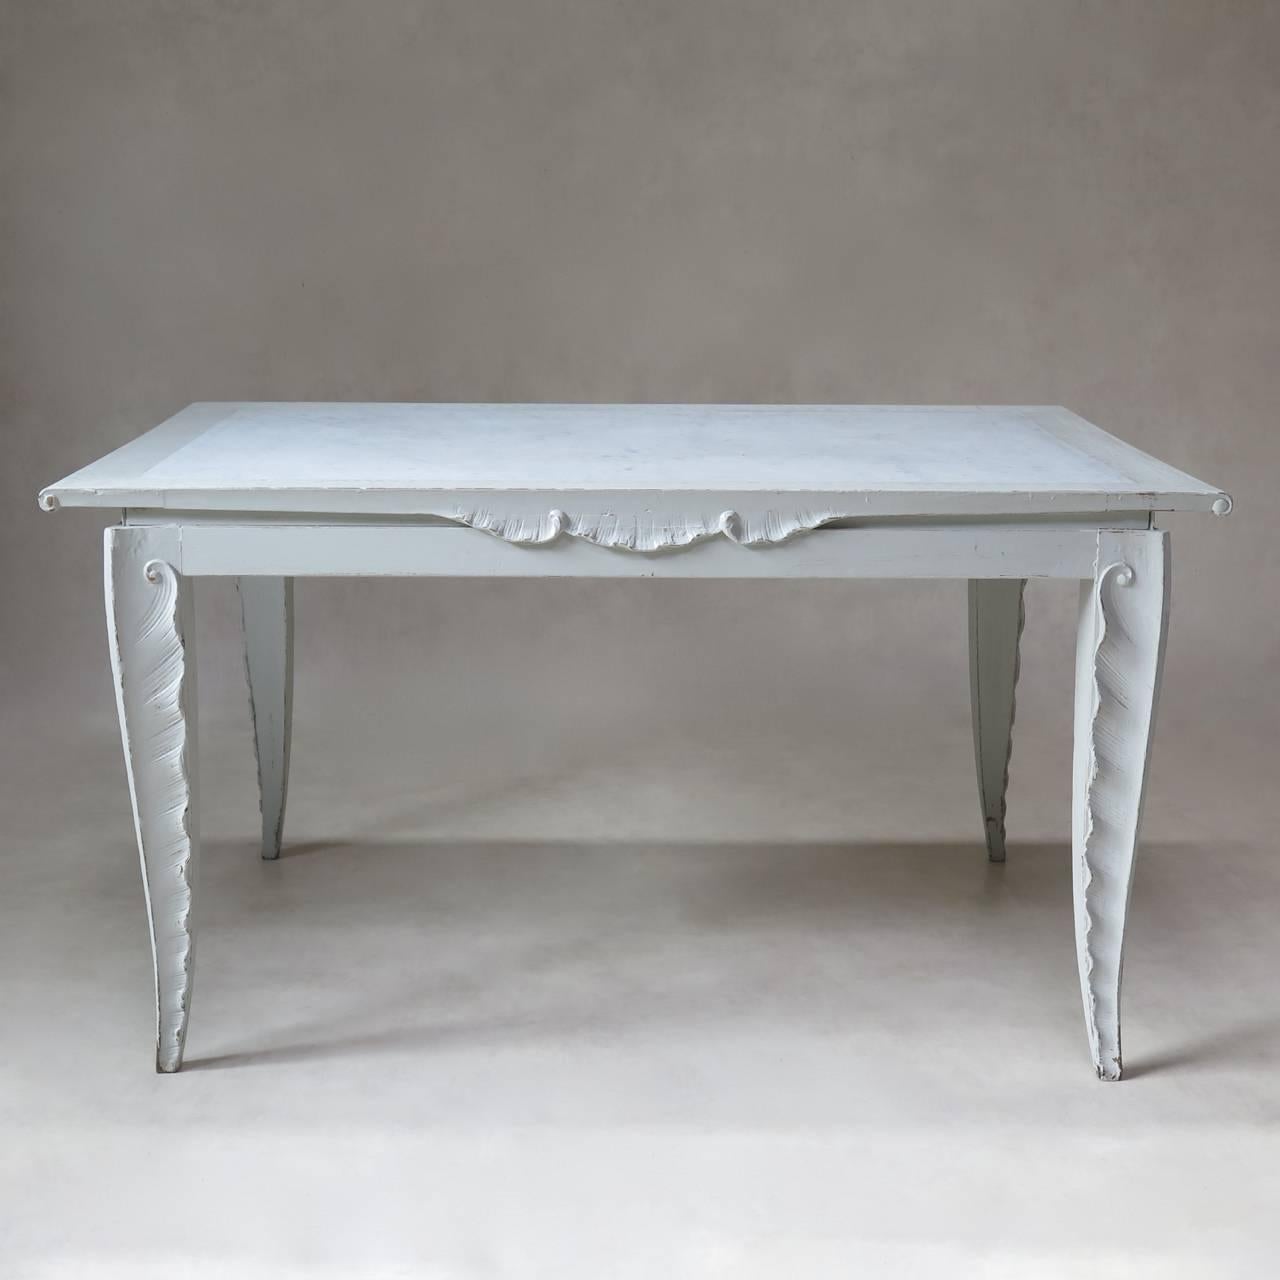 Elegant painted dining room table and four chairs of unusual design.

The rectangular table has a white marble top with a wood surround and is raised on tapering legs carved with a delicate scalloped palm-frond or feather-like design. The apron